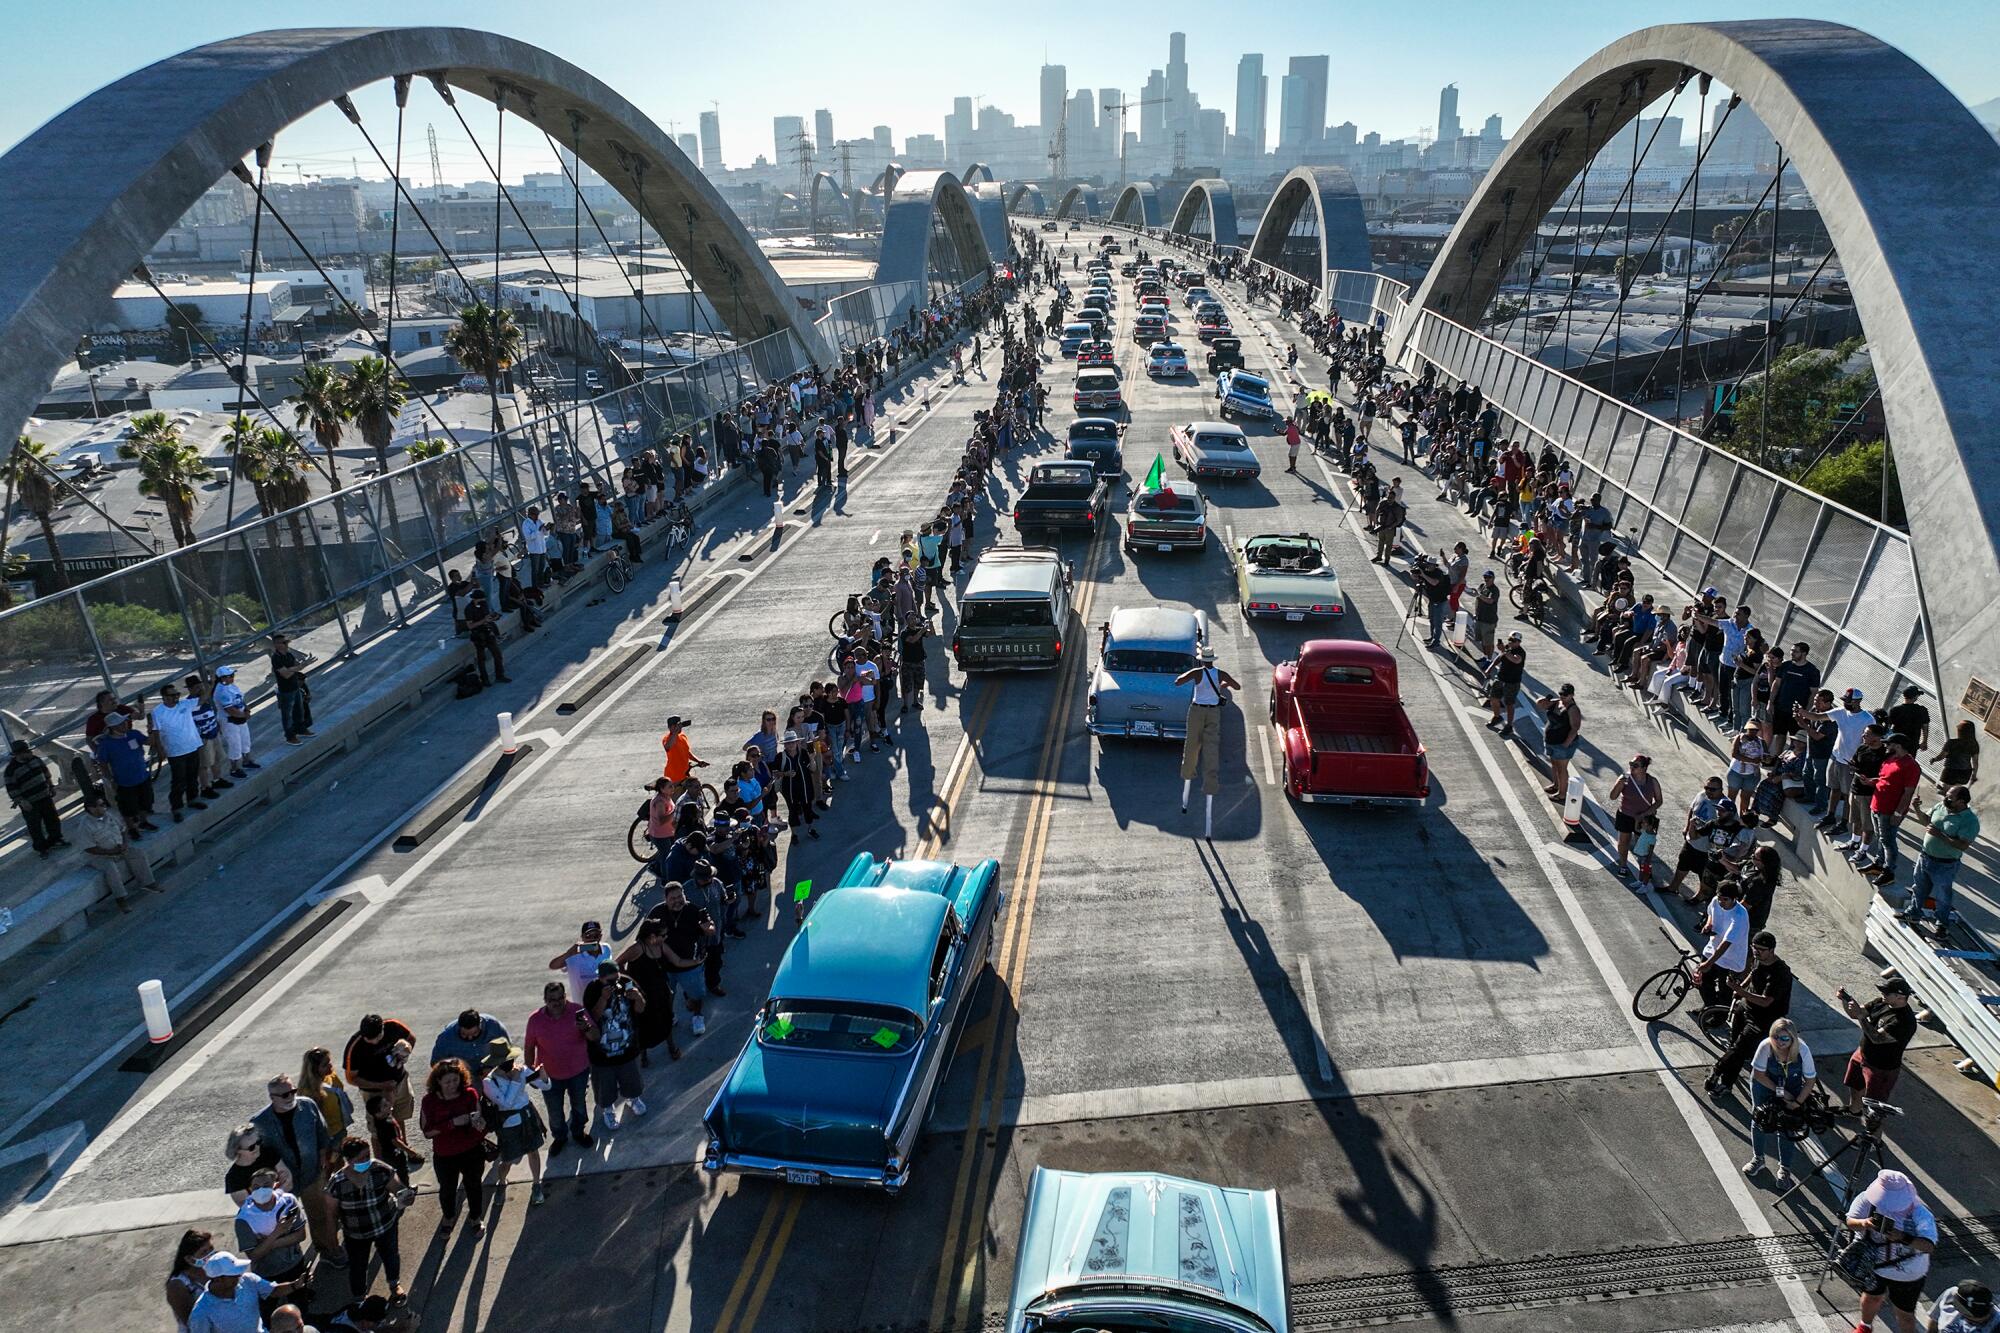 The Sixth Street Viaduct is open to traffic 